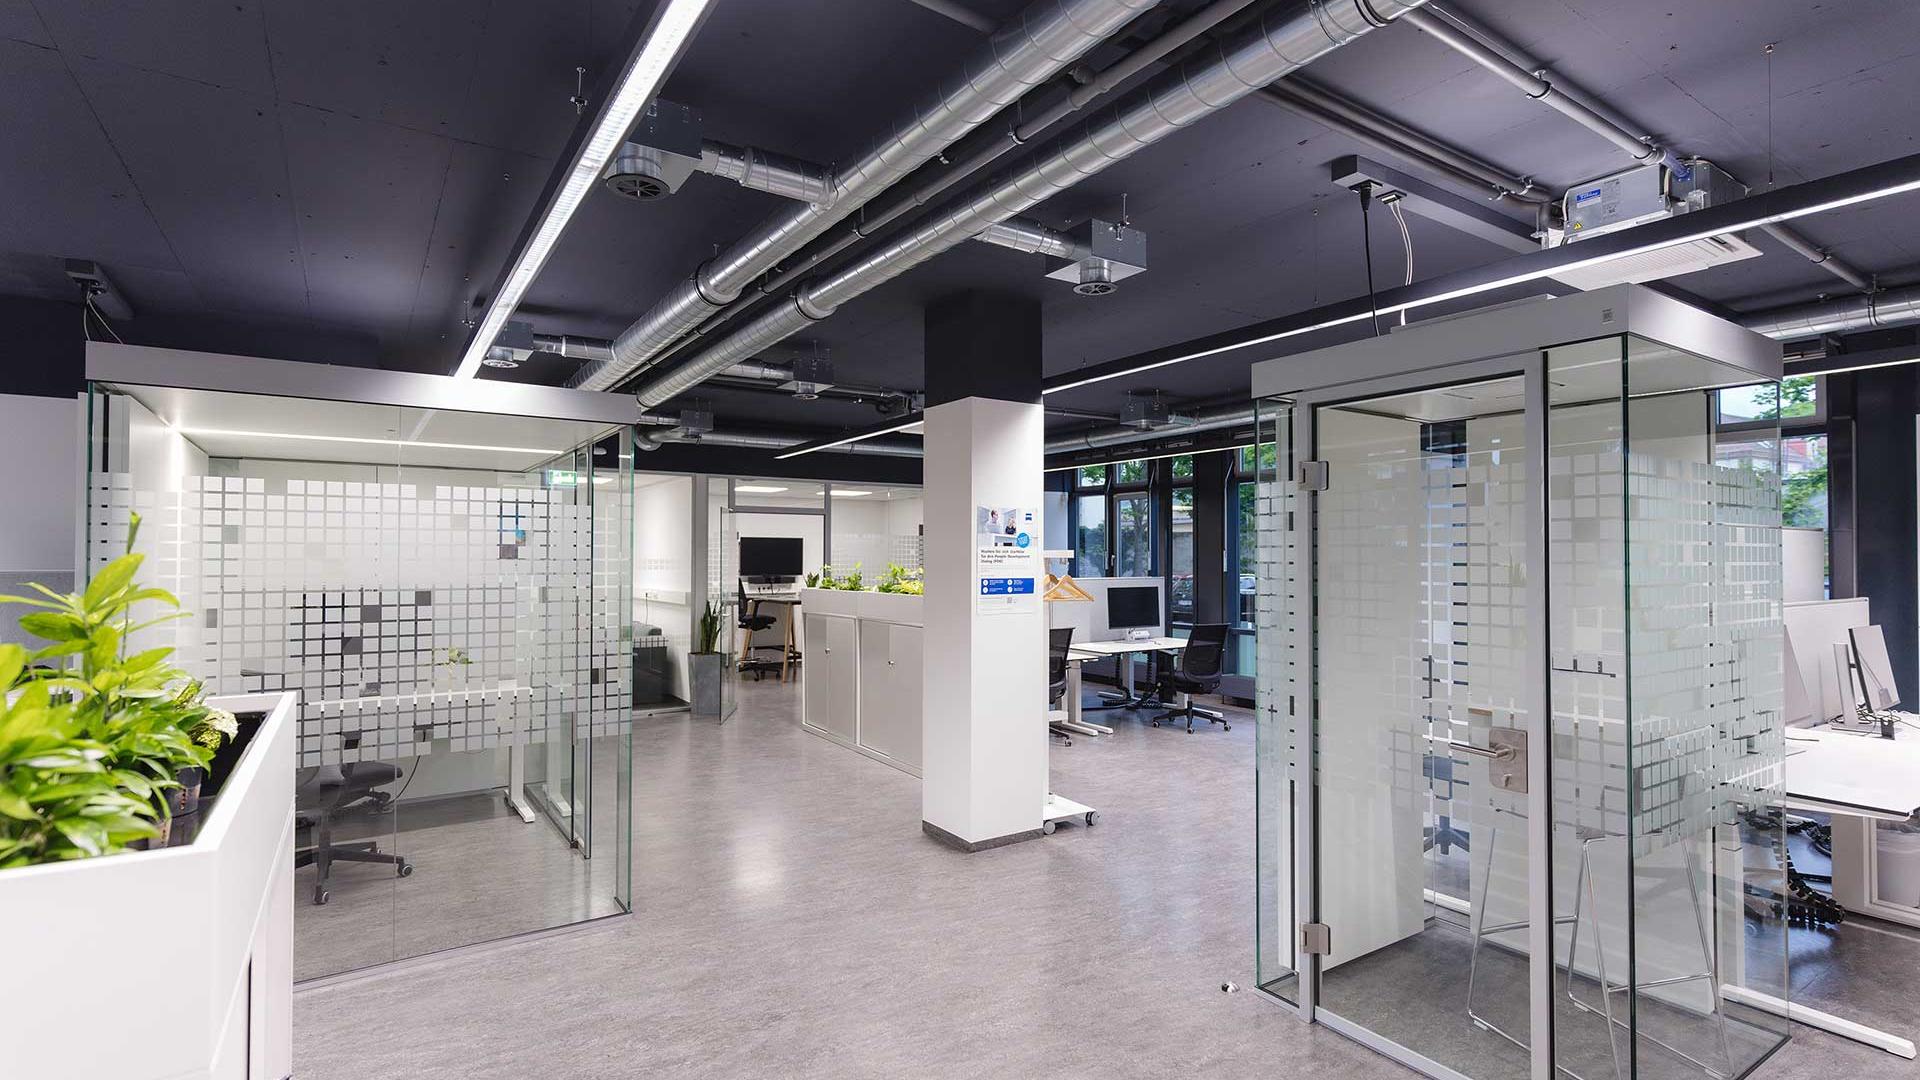 With around 700 square meters of floor space, the ZEISS Innovation Hub Dresden features modern workstations and laboratories.